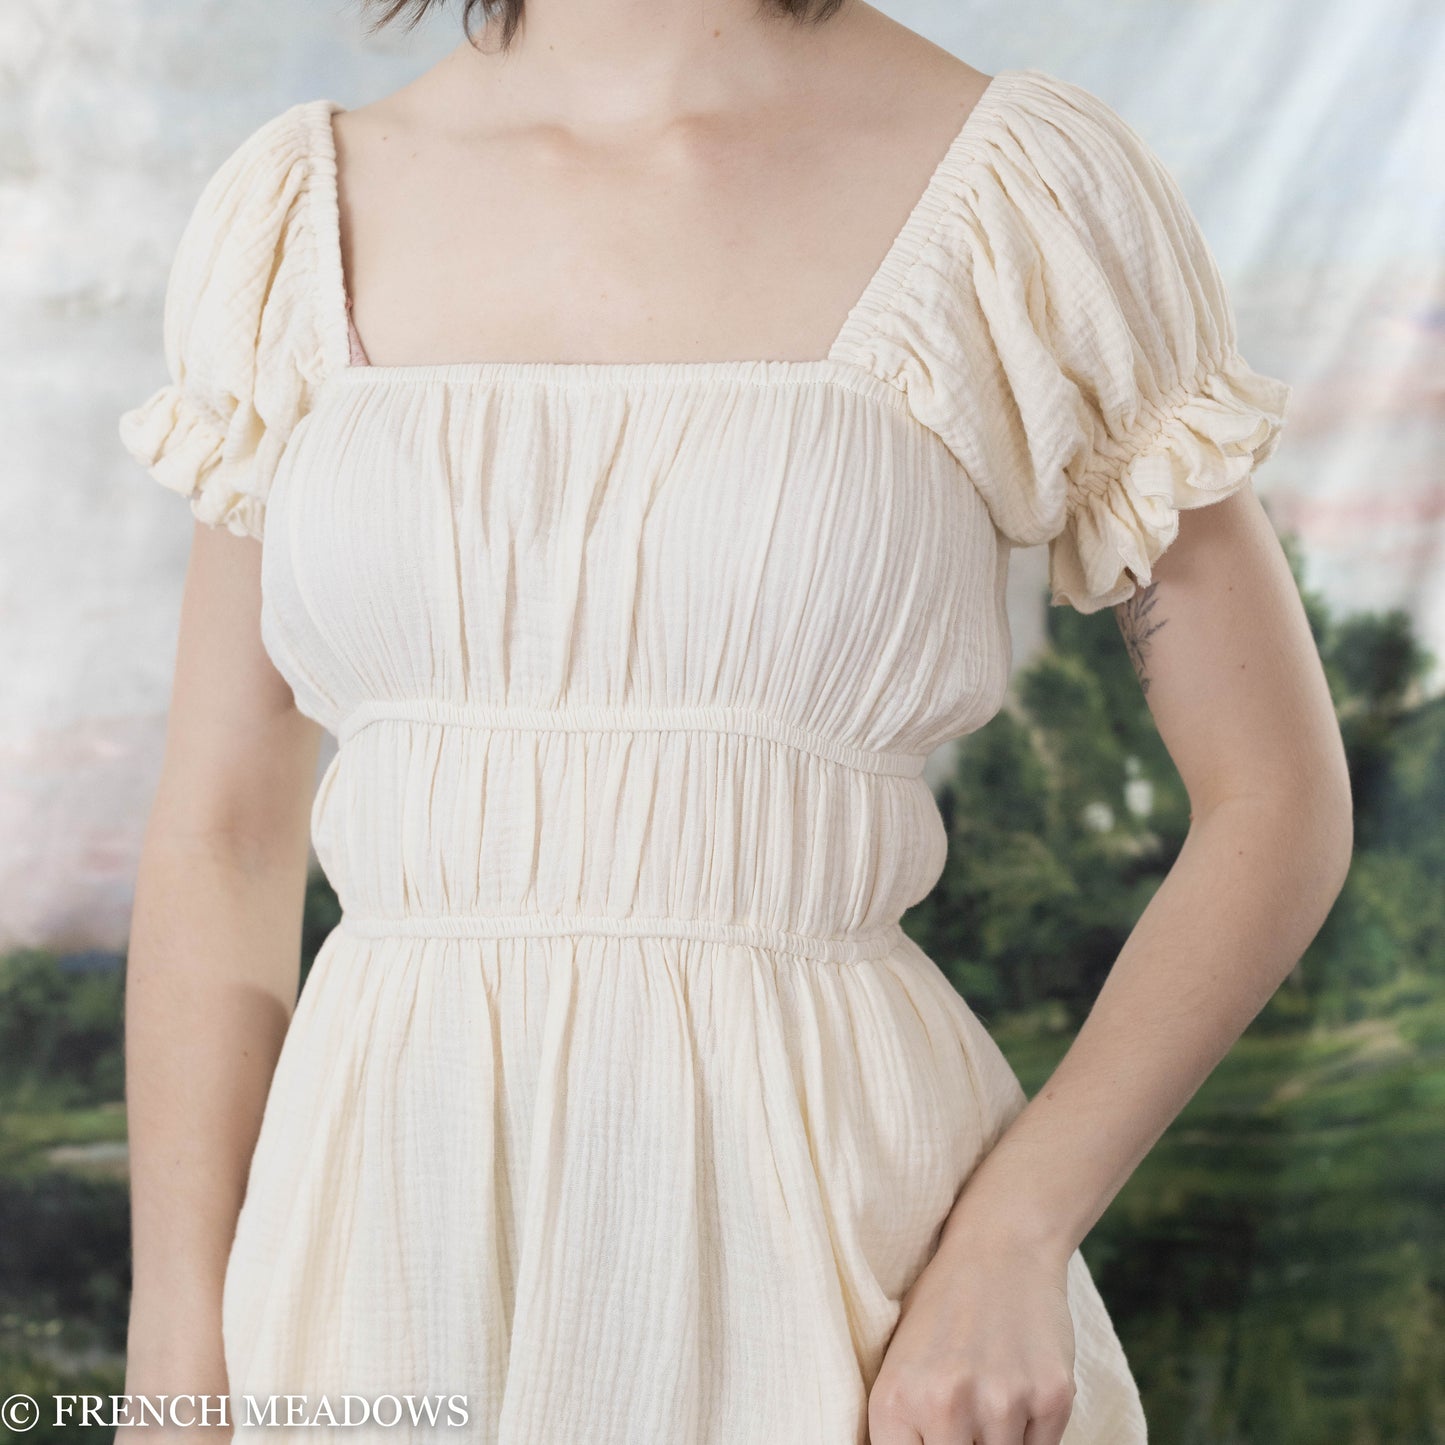 a white cotton dress with elastic rouching under the bust and at the waist in a classic milkmaid style